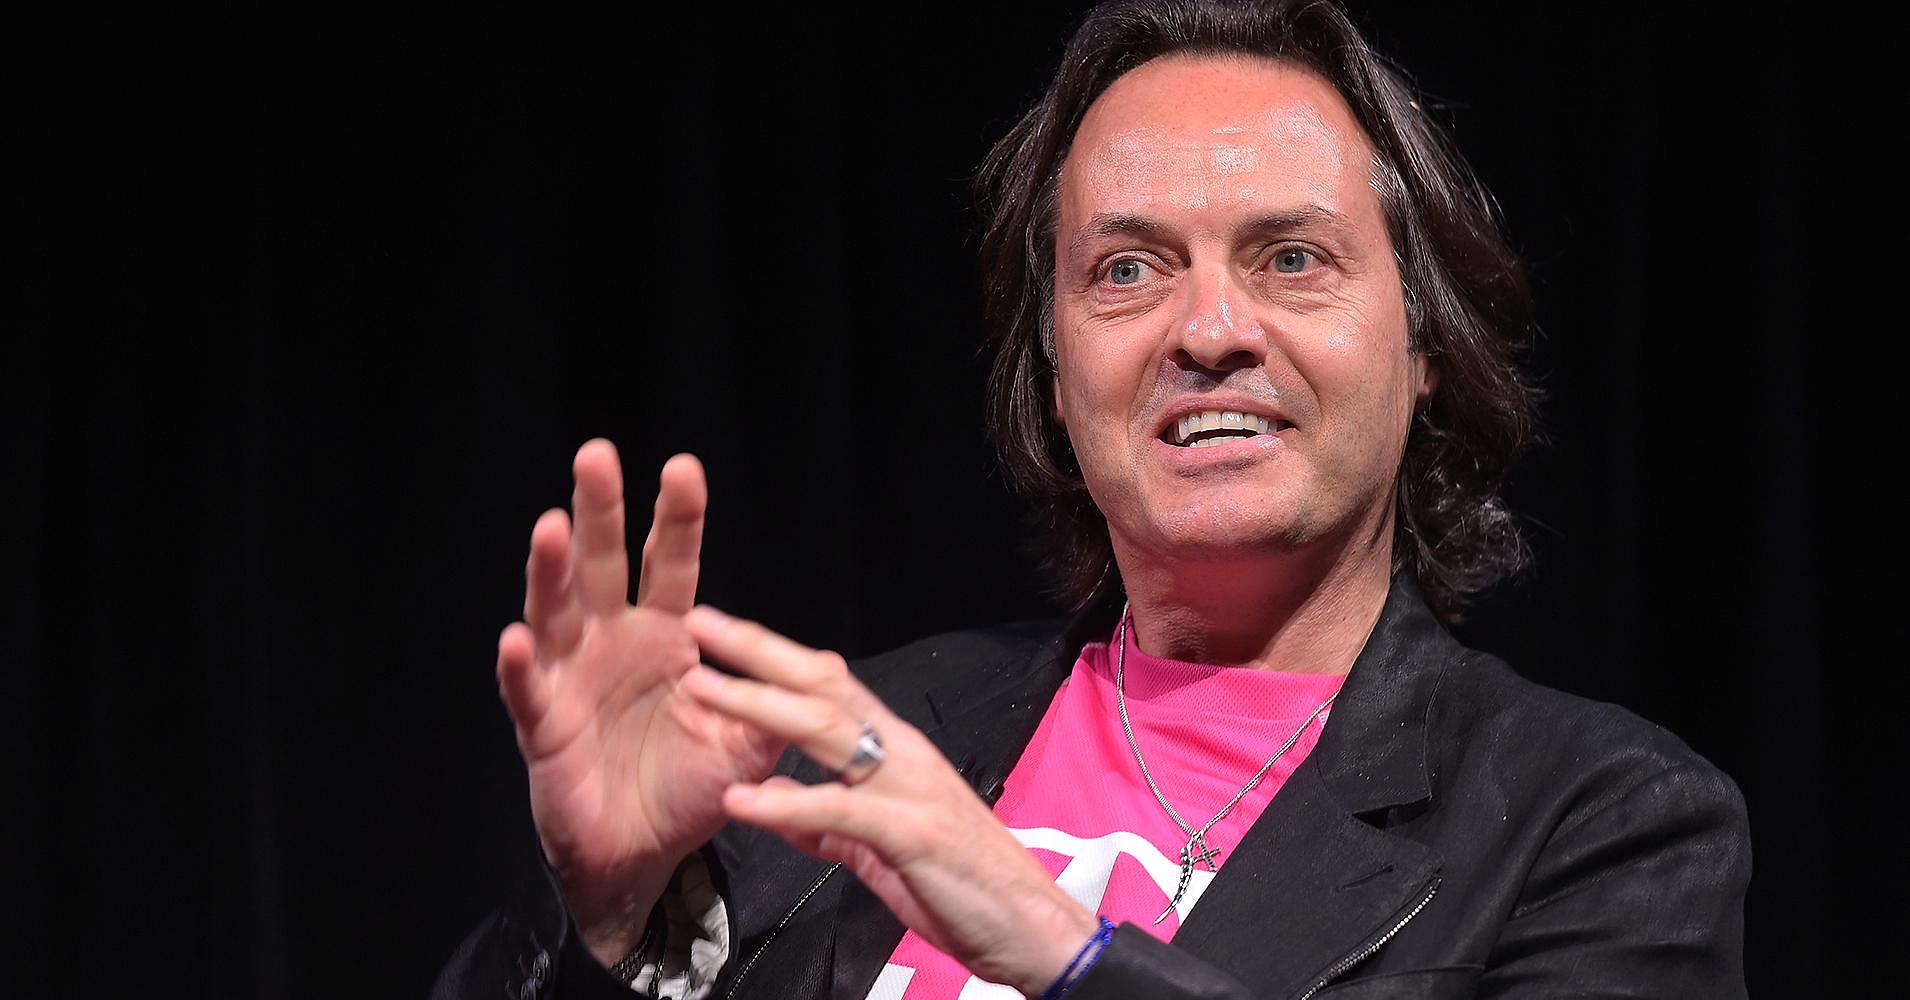 Sprint, T-Mobile set to announce a $26 billion merger, with John Legere at the helm